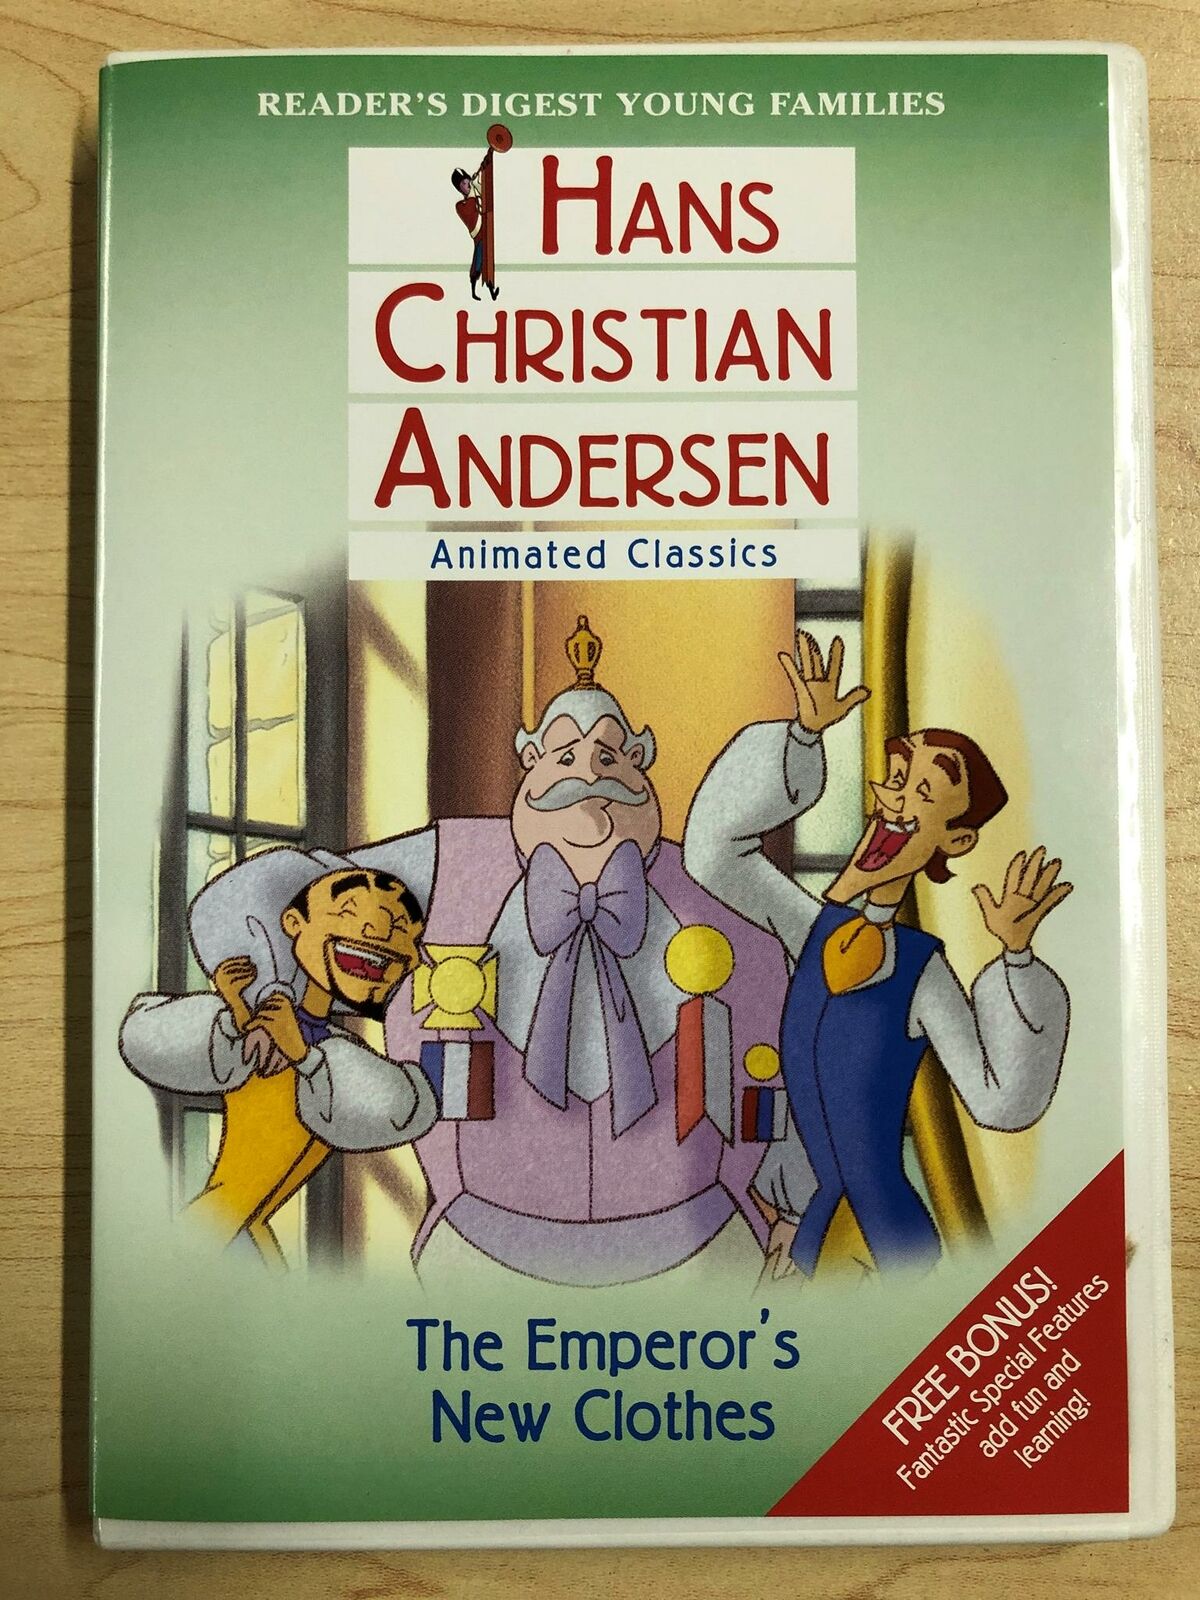 Hans Christian Andersen - The Emperors New Clothes (DVD, 2006, animated) - G0531